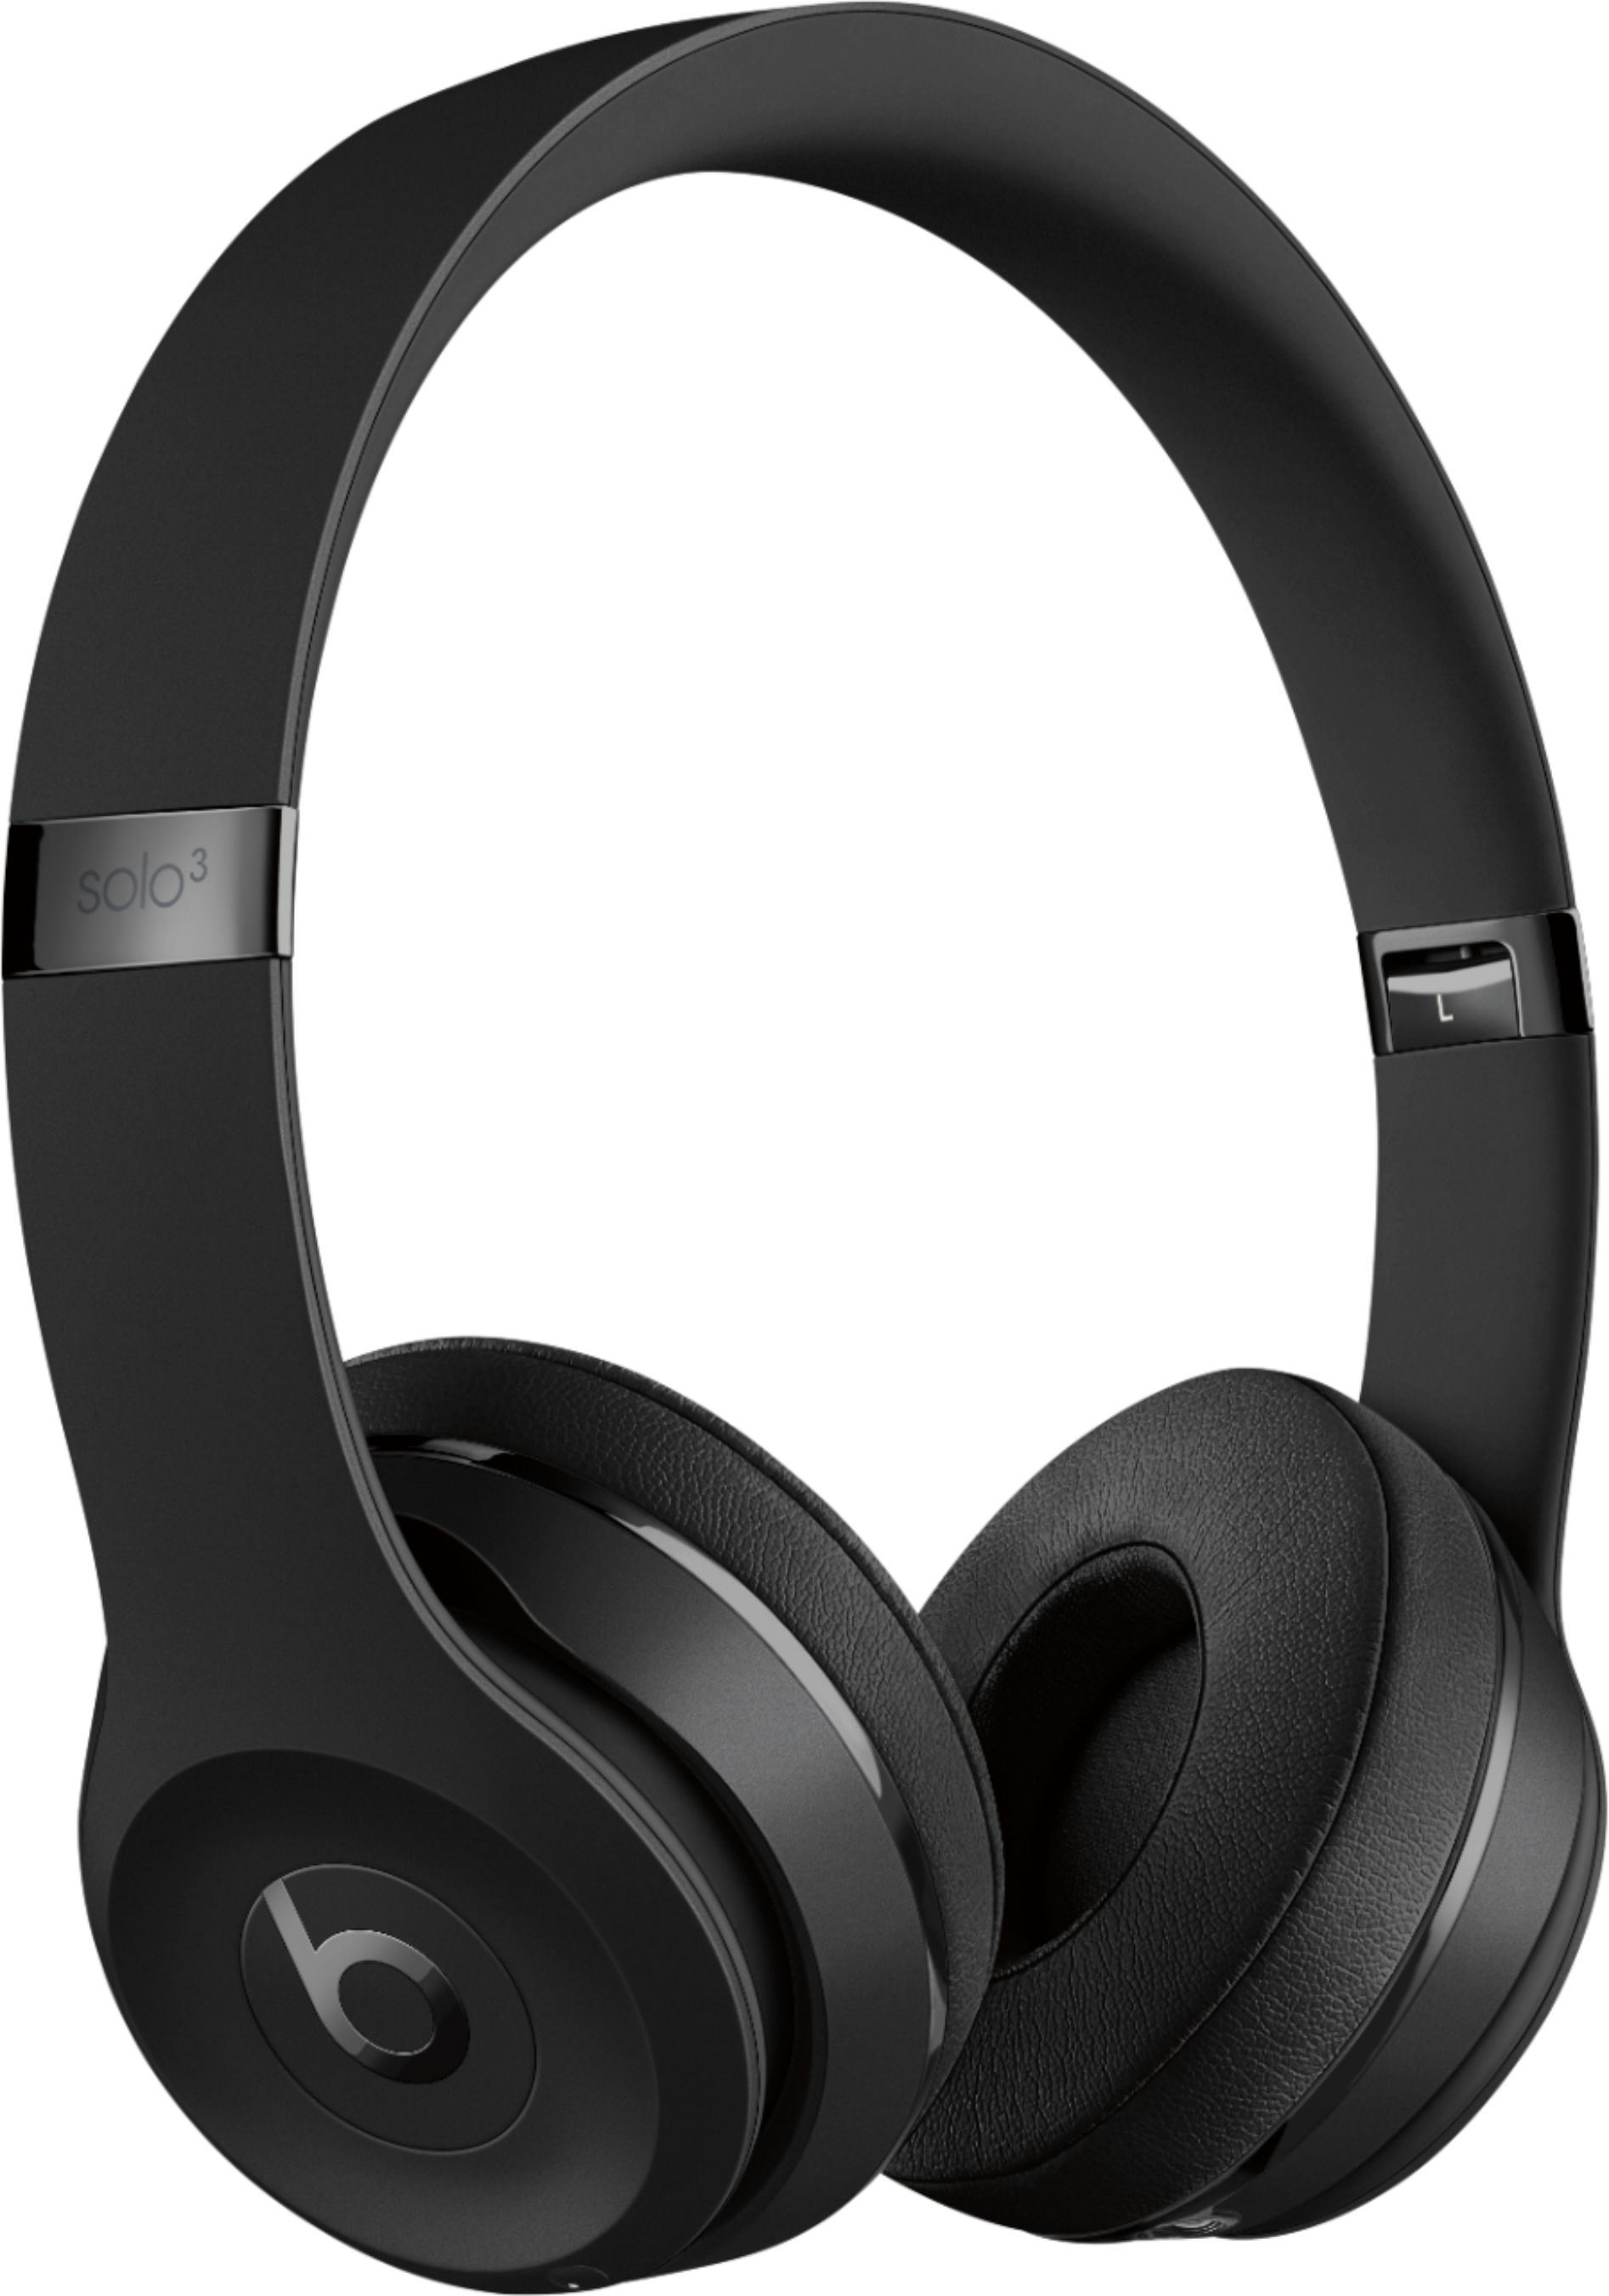 Beats by Dr. Dre Solo³ The Beats Icon Wireless On-Ear Headphones Matte Black MX432LL/A - Buy